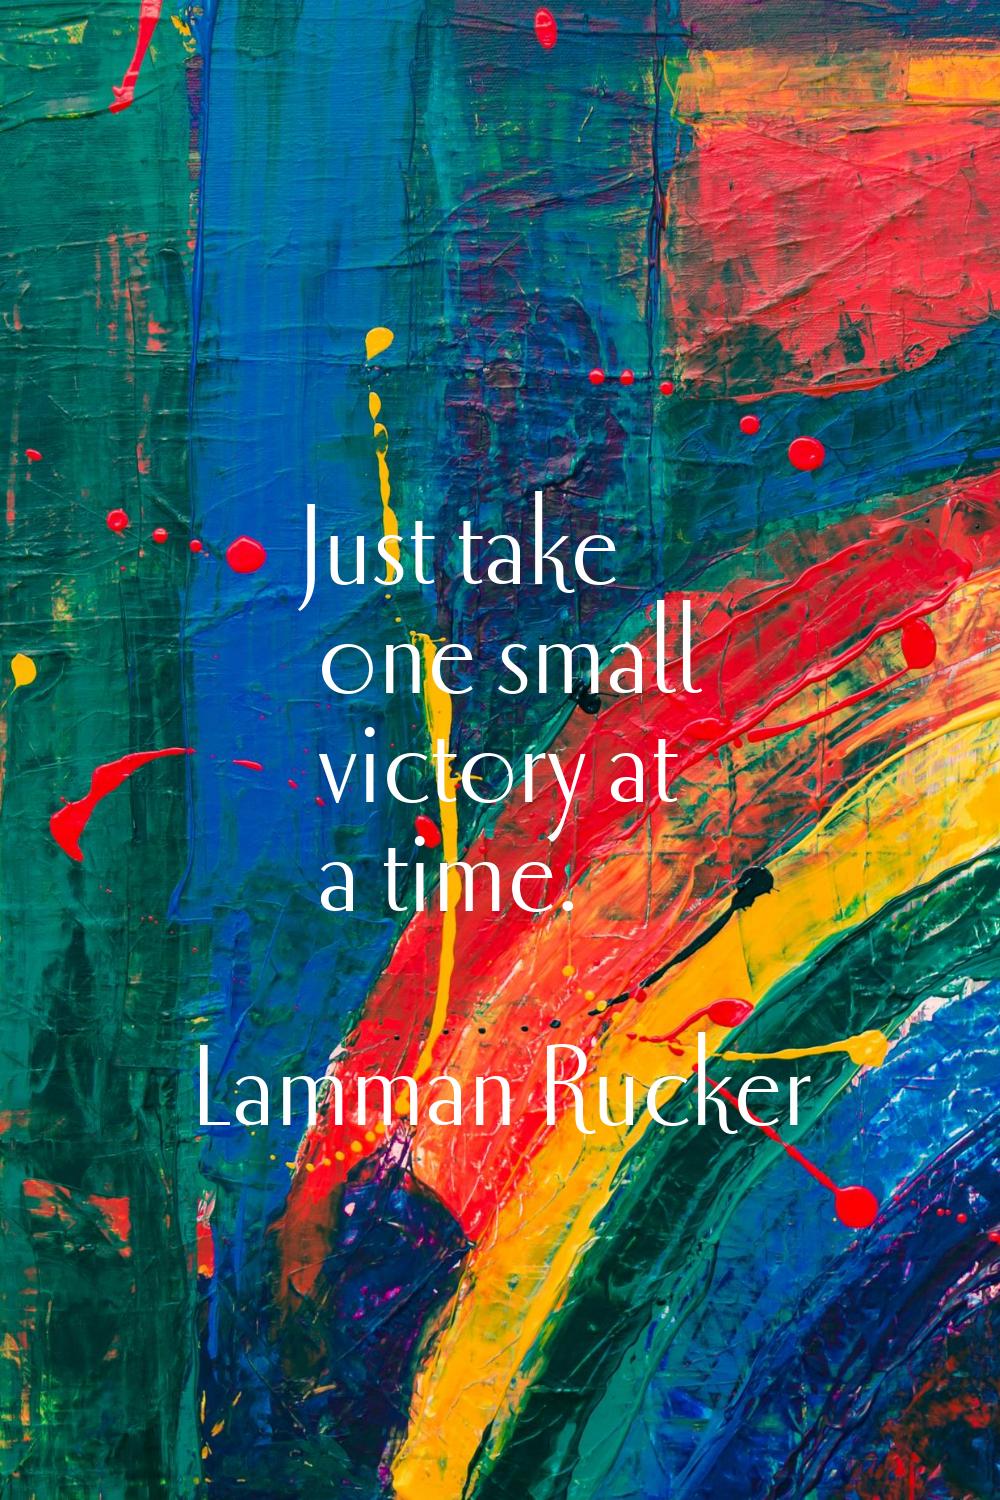 Just take one small victory at a time.